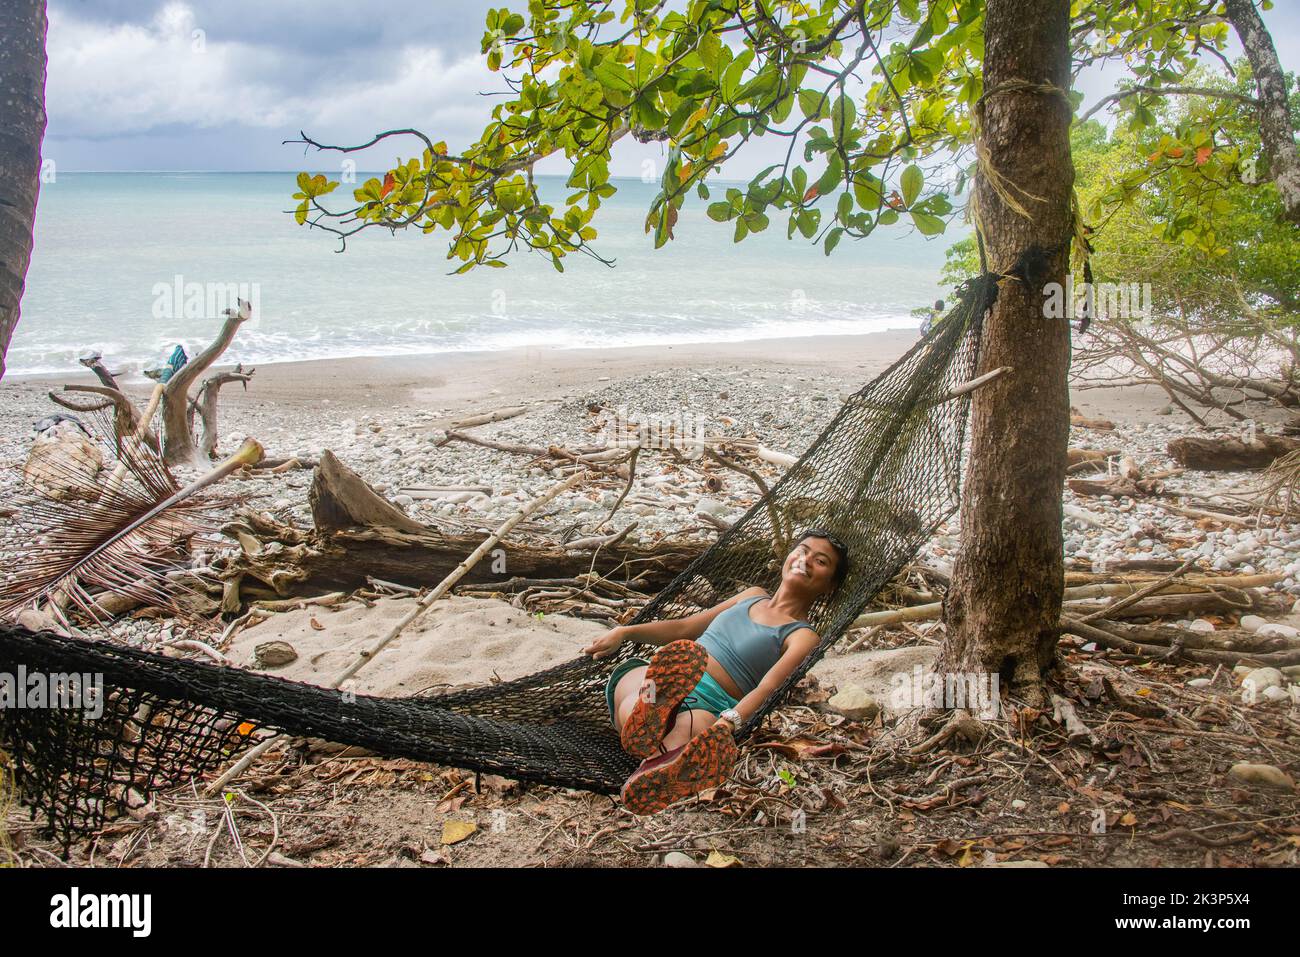 Enjoying a wild beach at the edge of Cabo Blanco Nature Reserve, Costa Rica Stock Photo